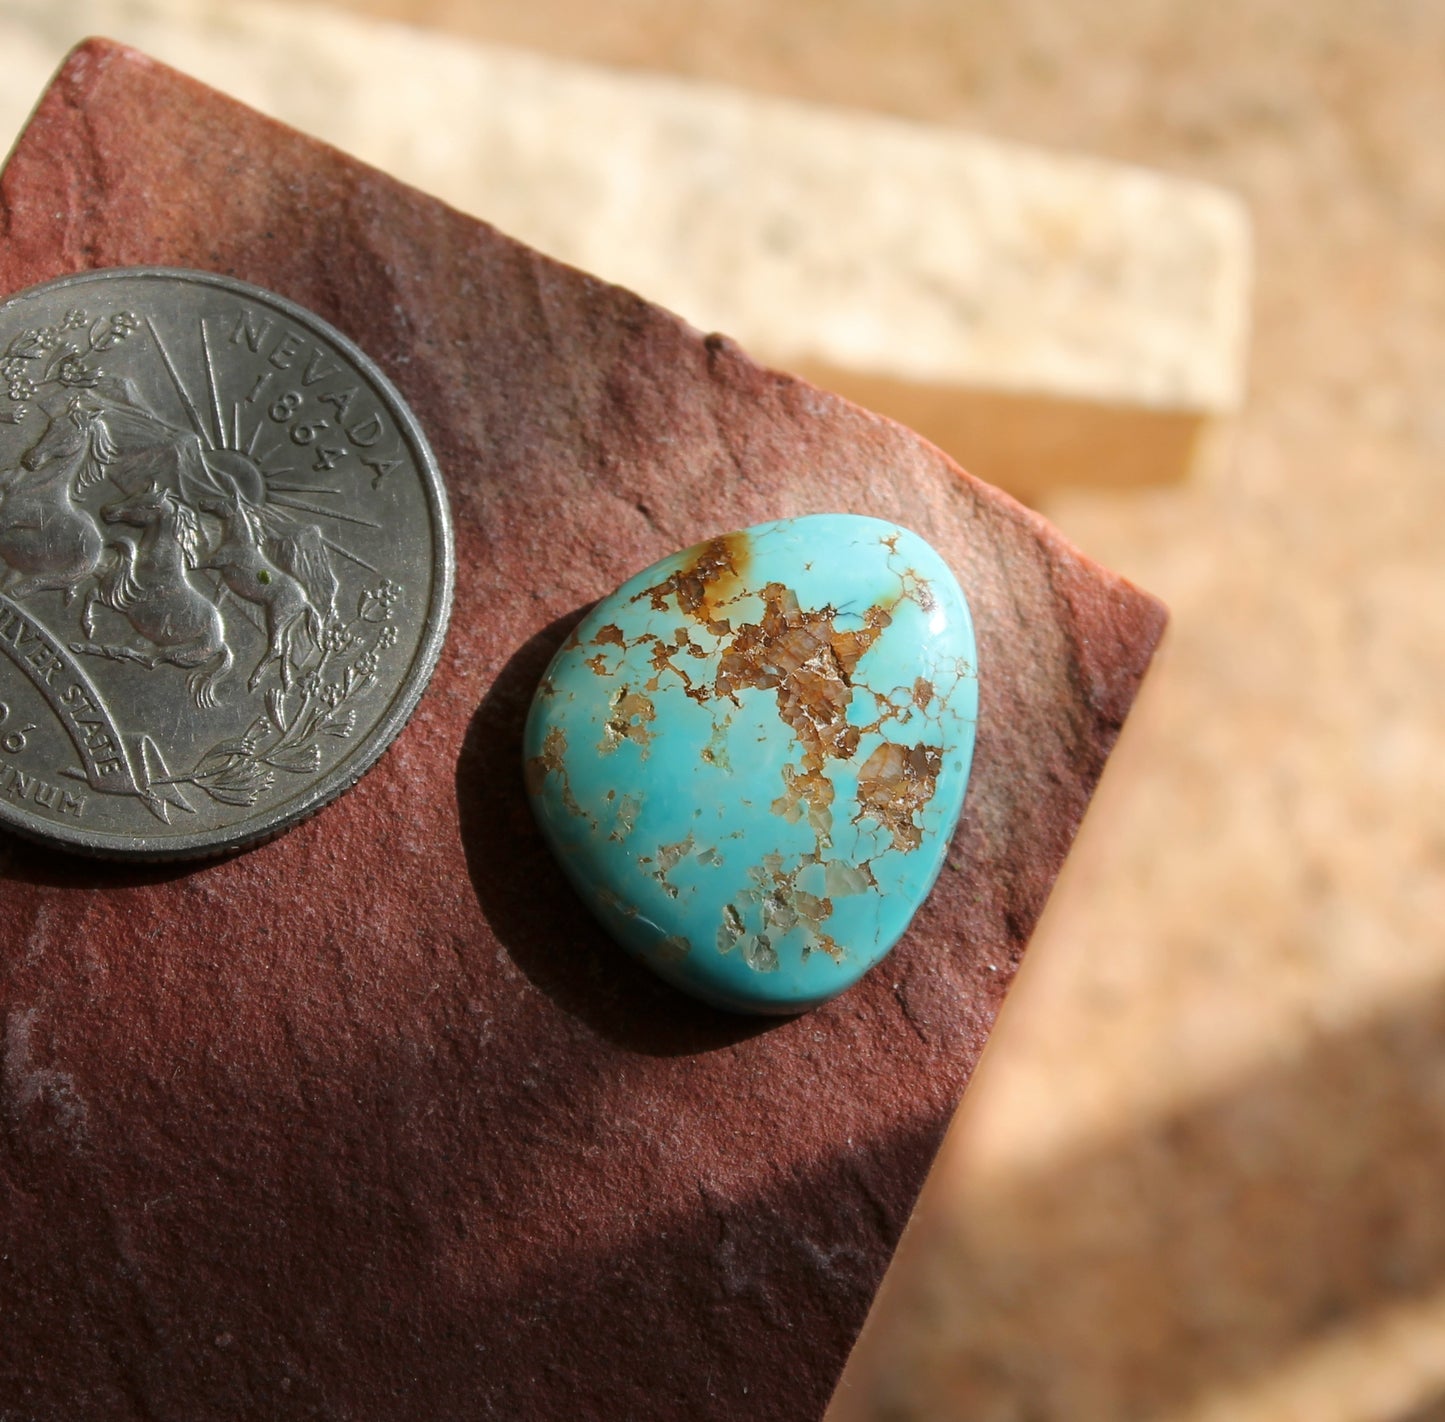 13 carat blue Stone Mountain Turquoise cabochon with red matrix